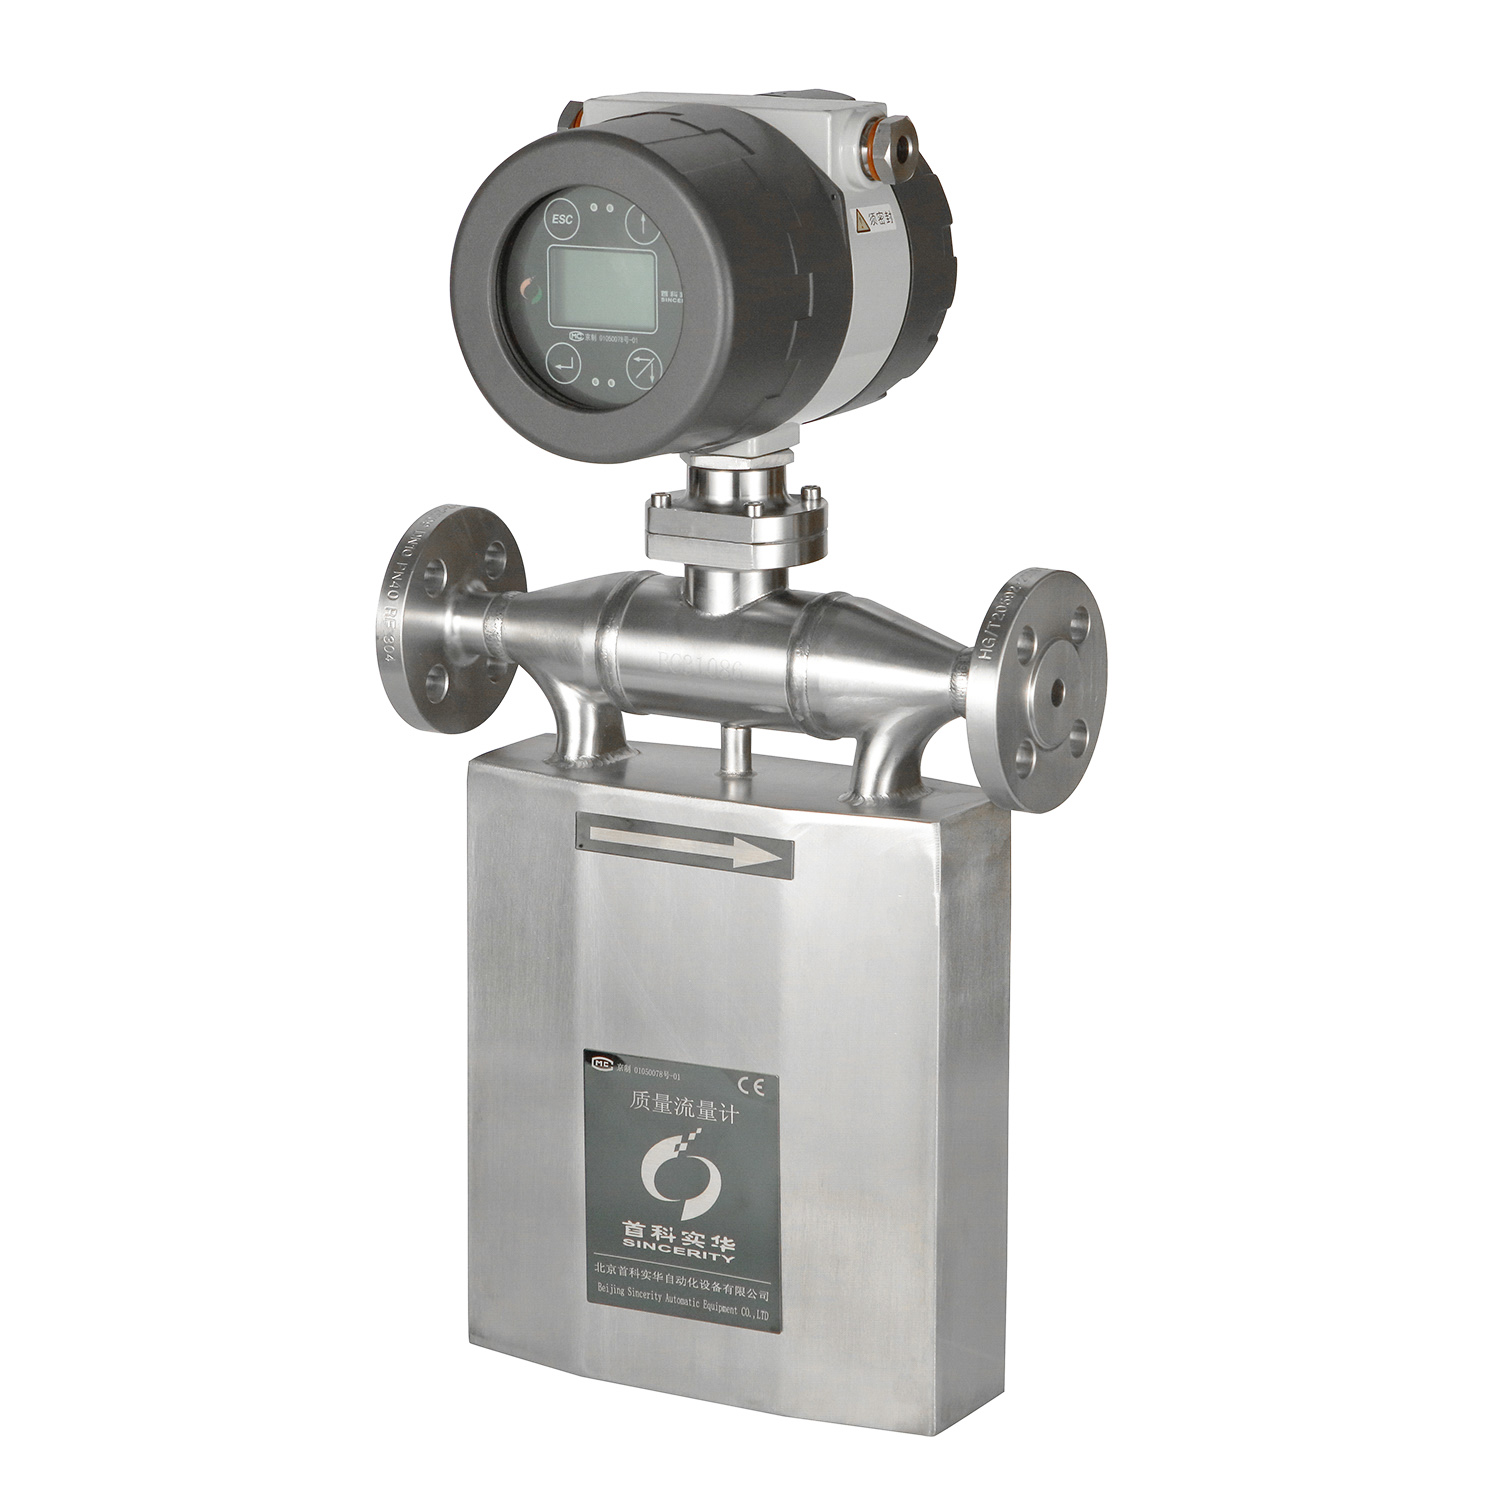 Sincerity best coriolis fuel flow meter for business for oil and gas-2